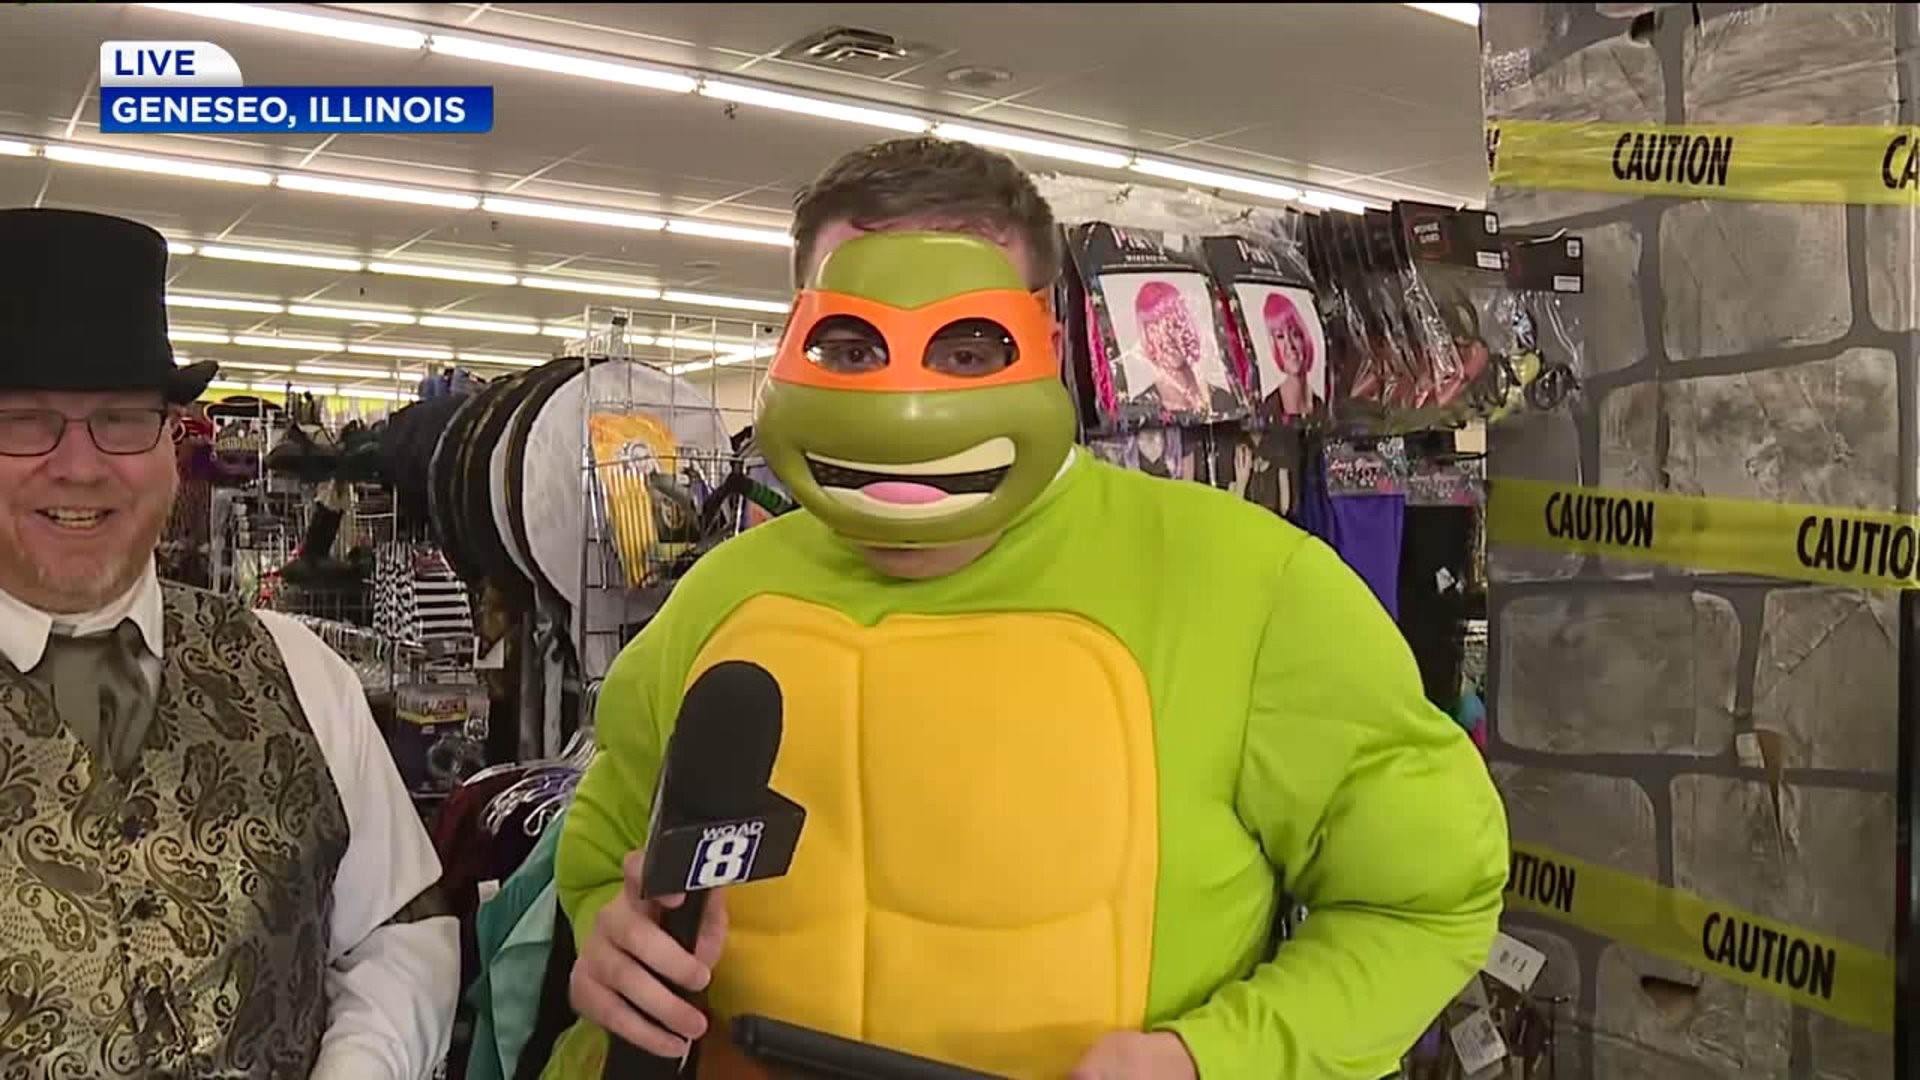 Coffee Break: Goodwill hooks Andrew up with a Ninja Turtle costume